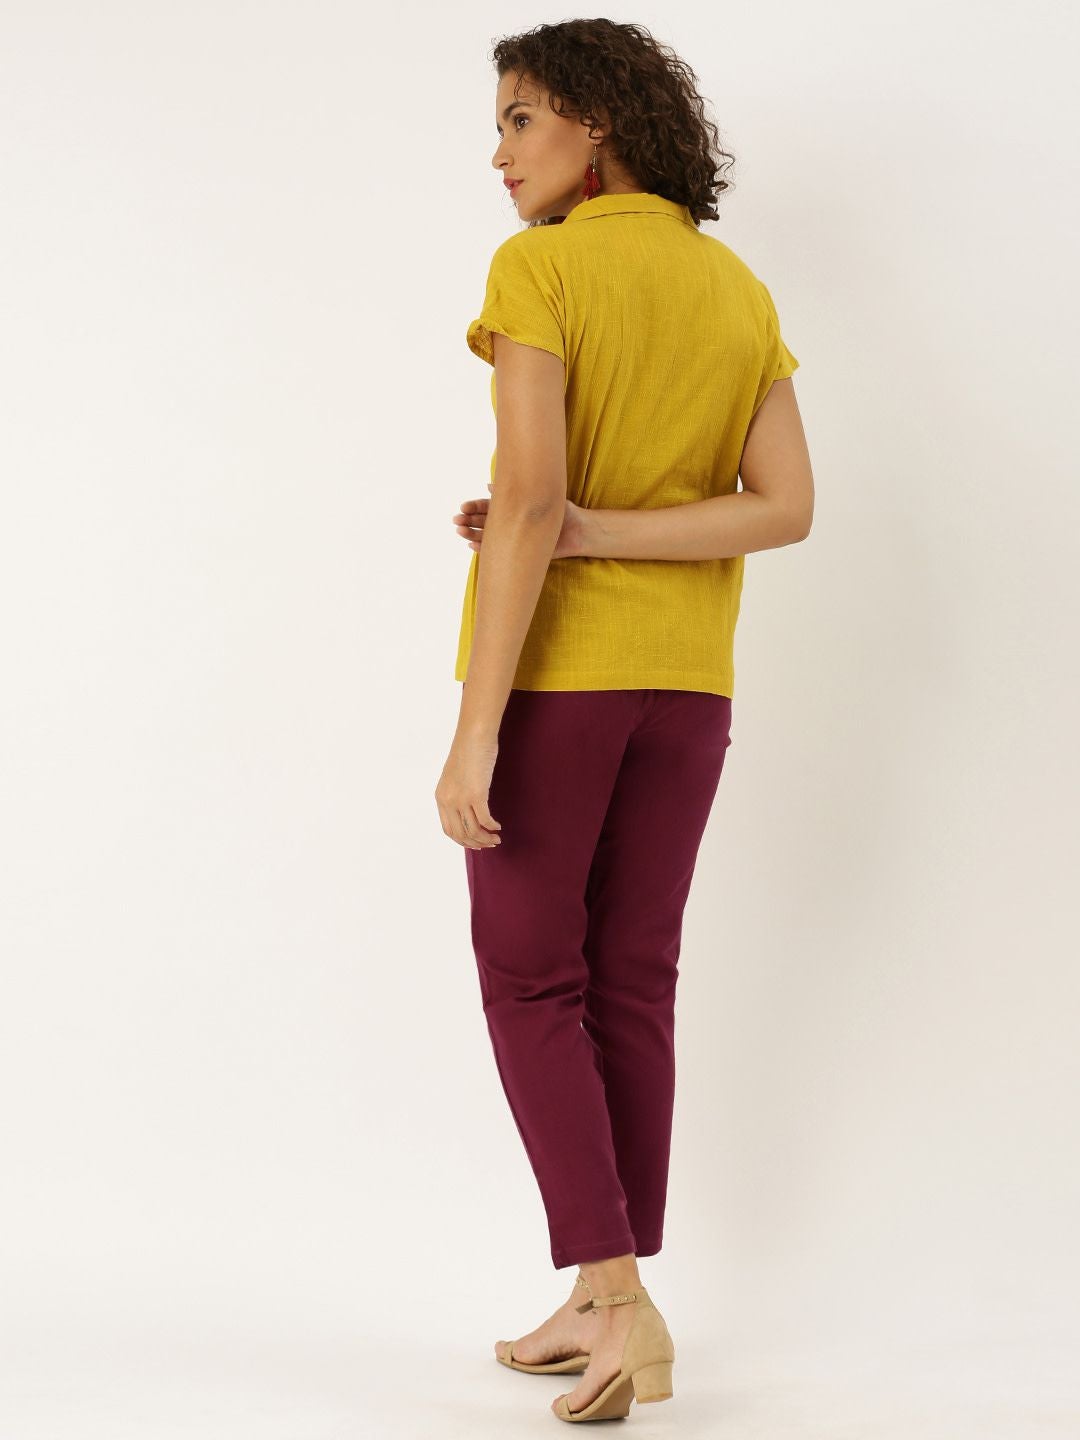 Mustard placement embroidered boxy top with Maroon pant.